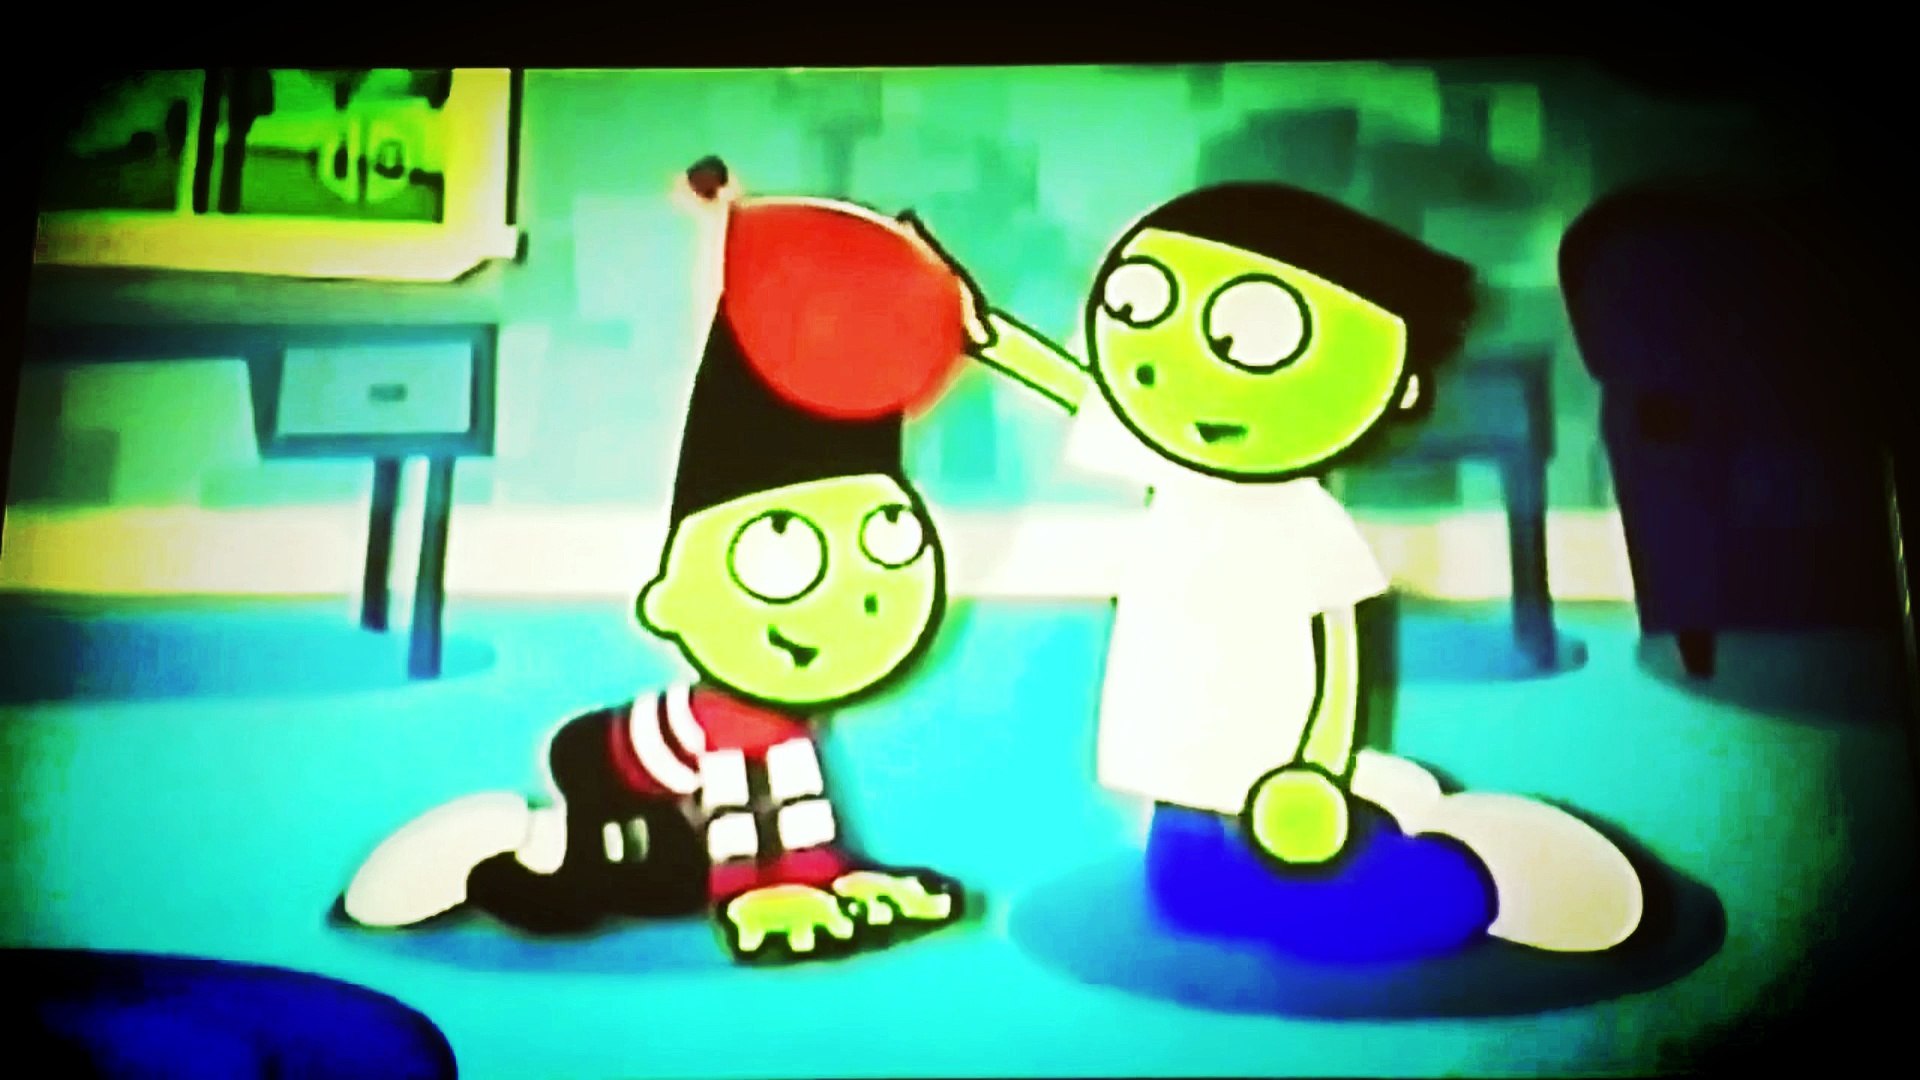 Pbs Kids Compilation Full Ep Bumpers Effects Video Dailymotion Enjoy the videos and music you love, upload original content, and share it all with friends, family, and the world on he is dot, dee and del's older brother. pbs kids compilation full ep bumpers